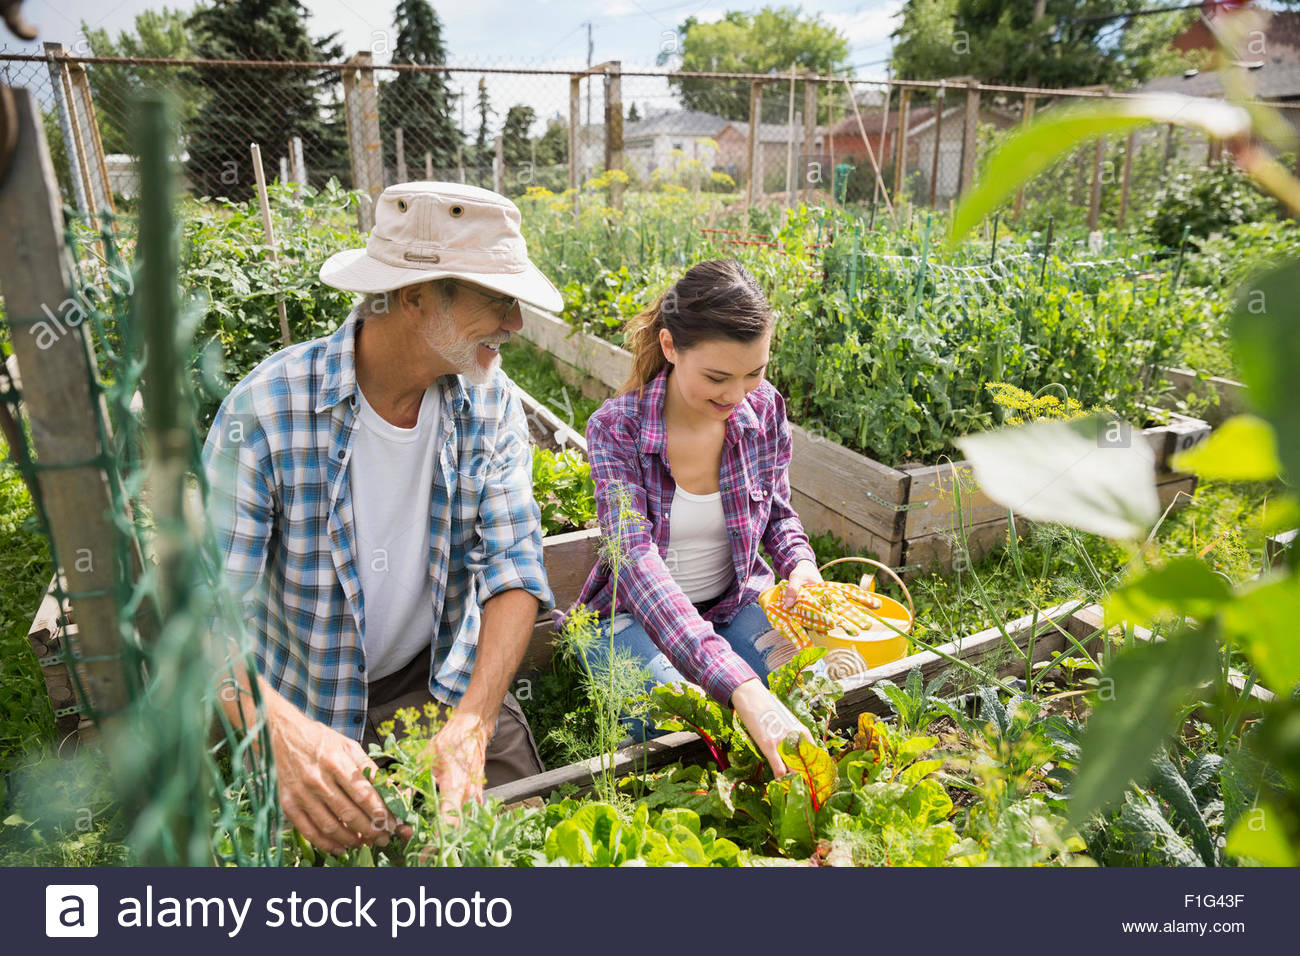 Father and daughter tending to vegetable garden Stock Photo